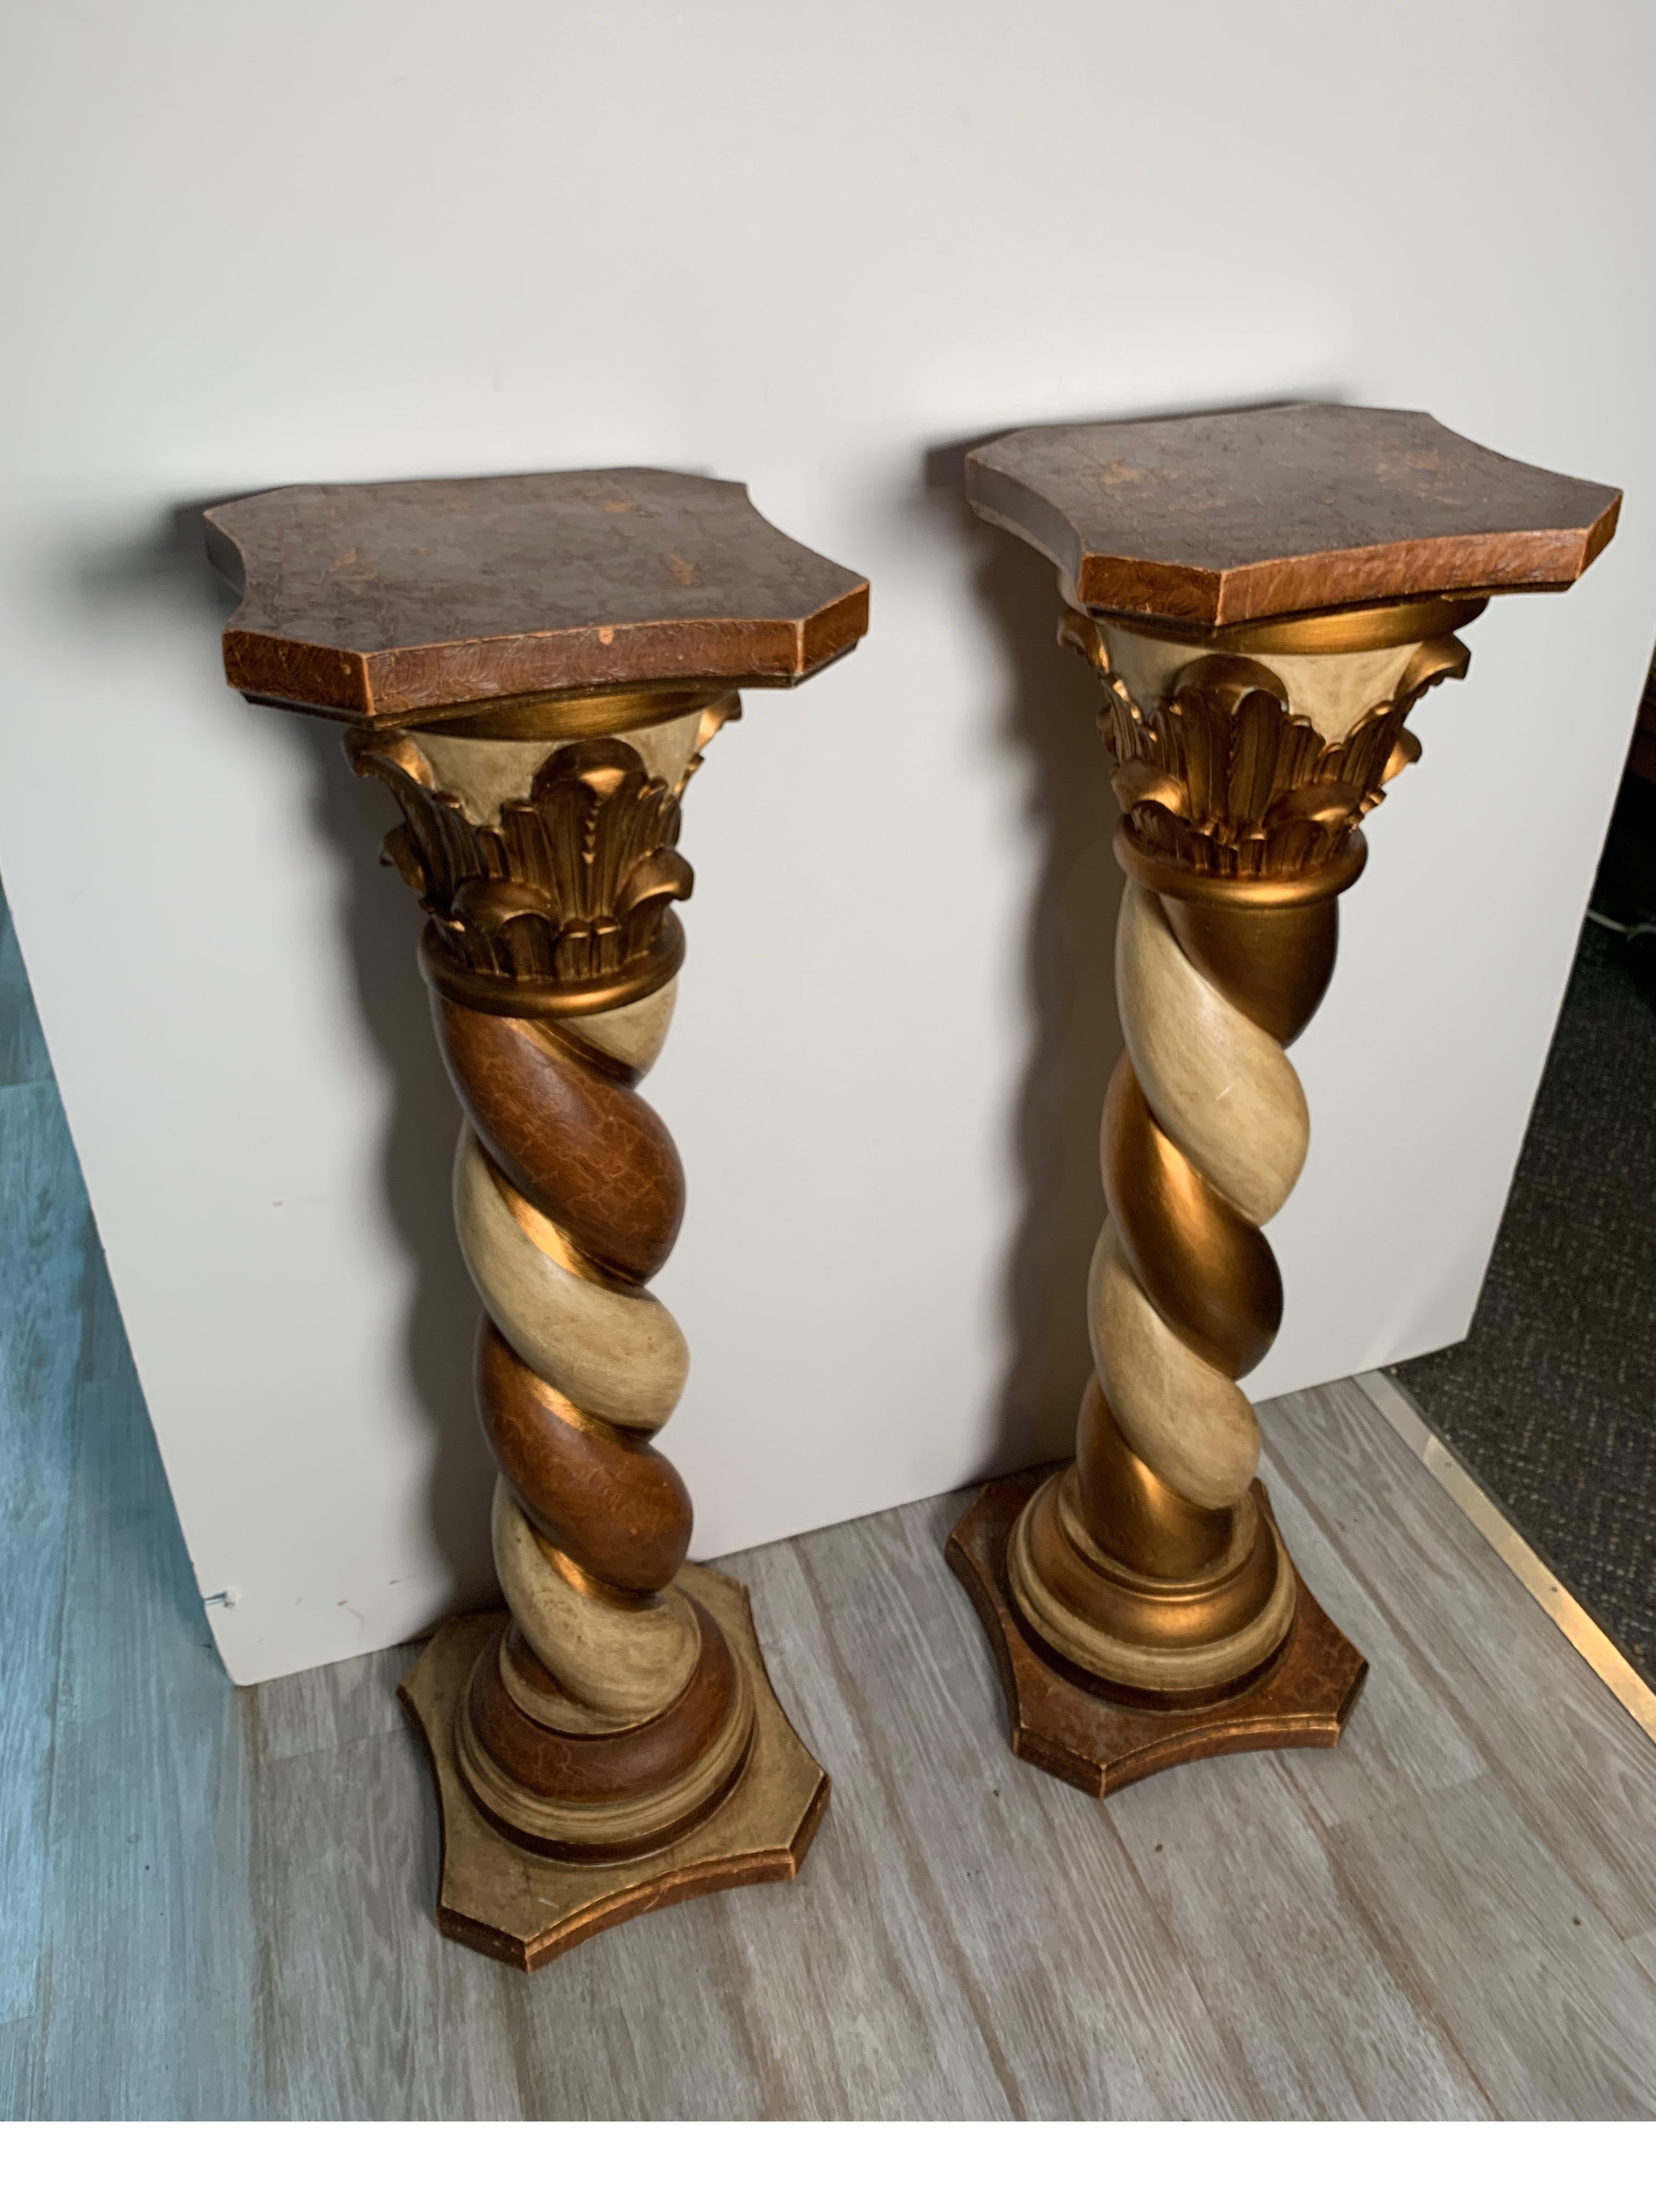 Midcentury Pair of Carved Wood Pedestals with Decorative Faux Painting 2